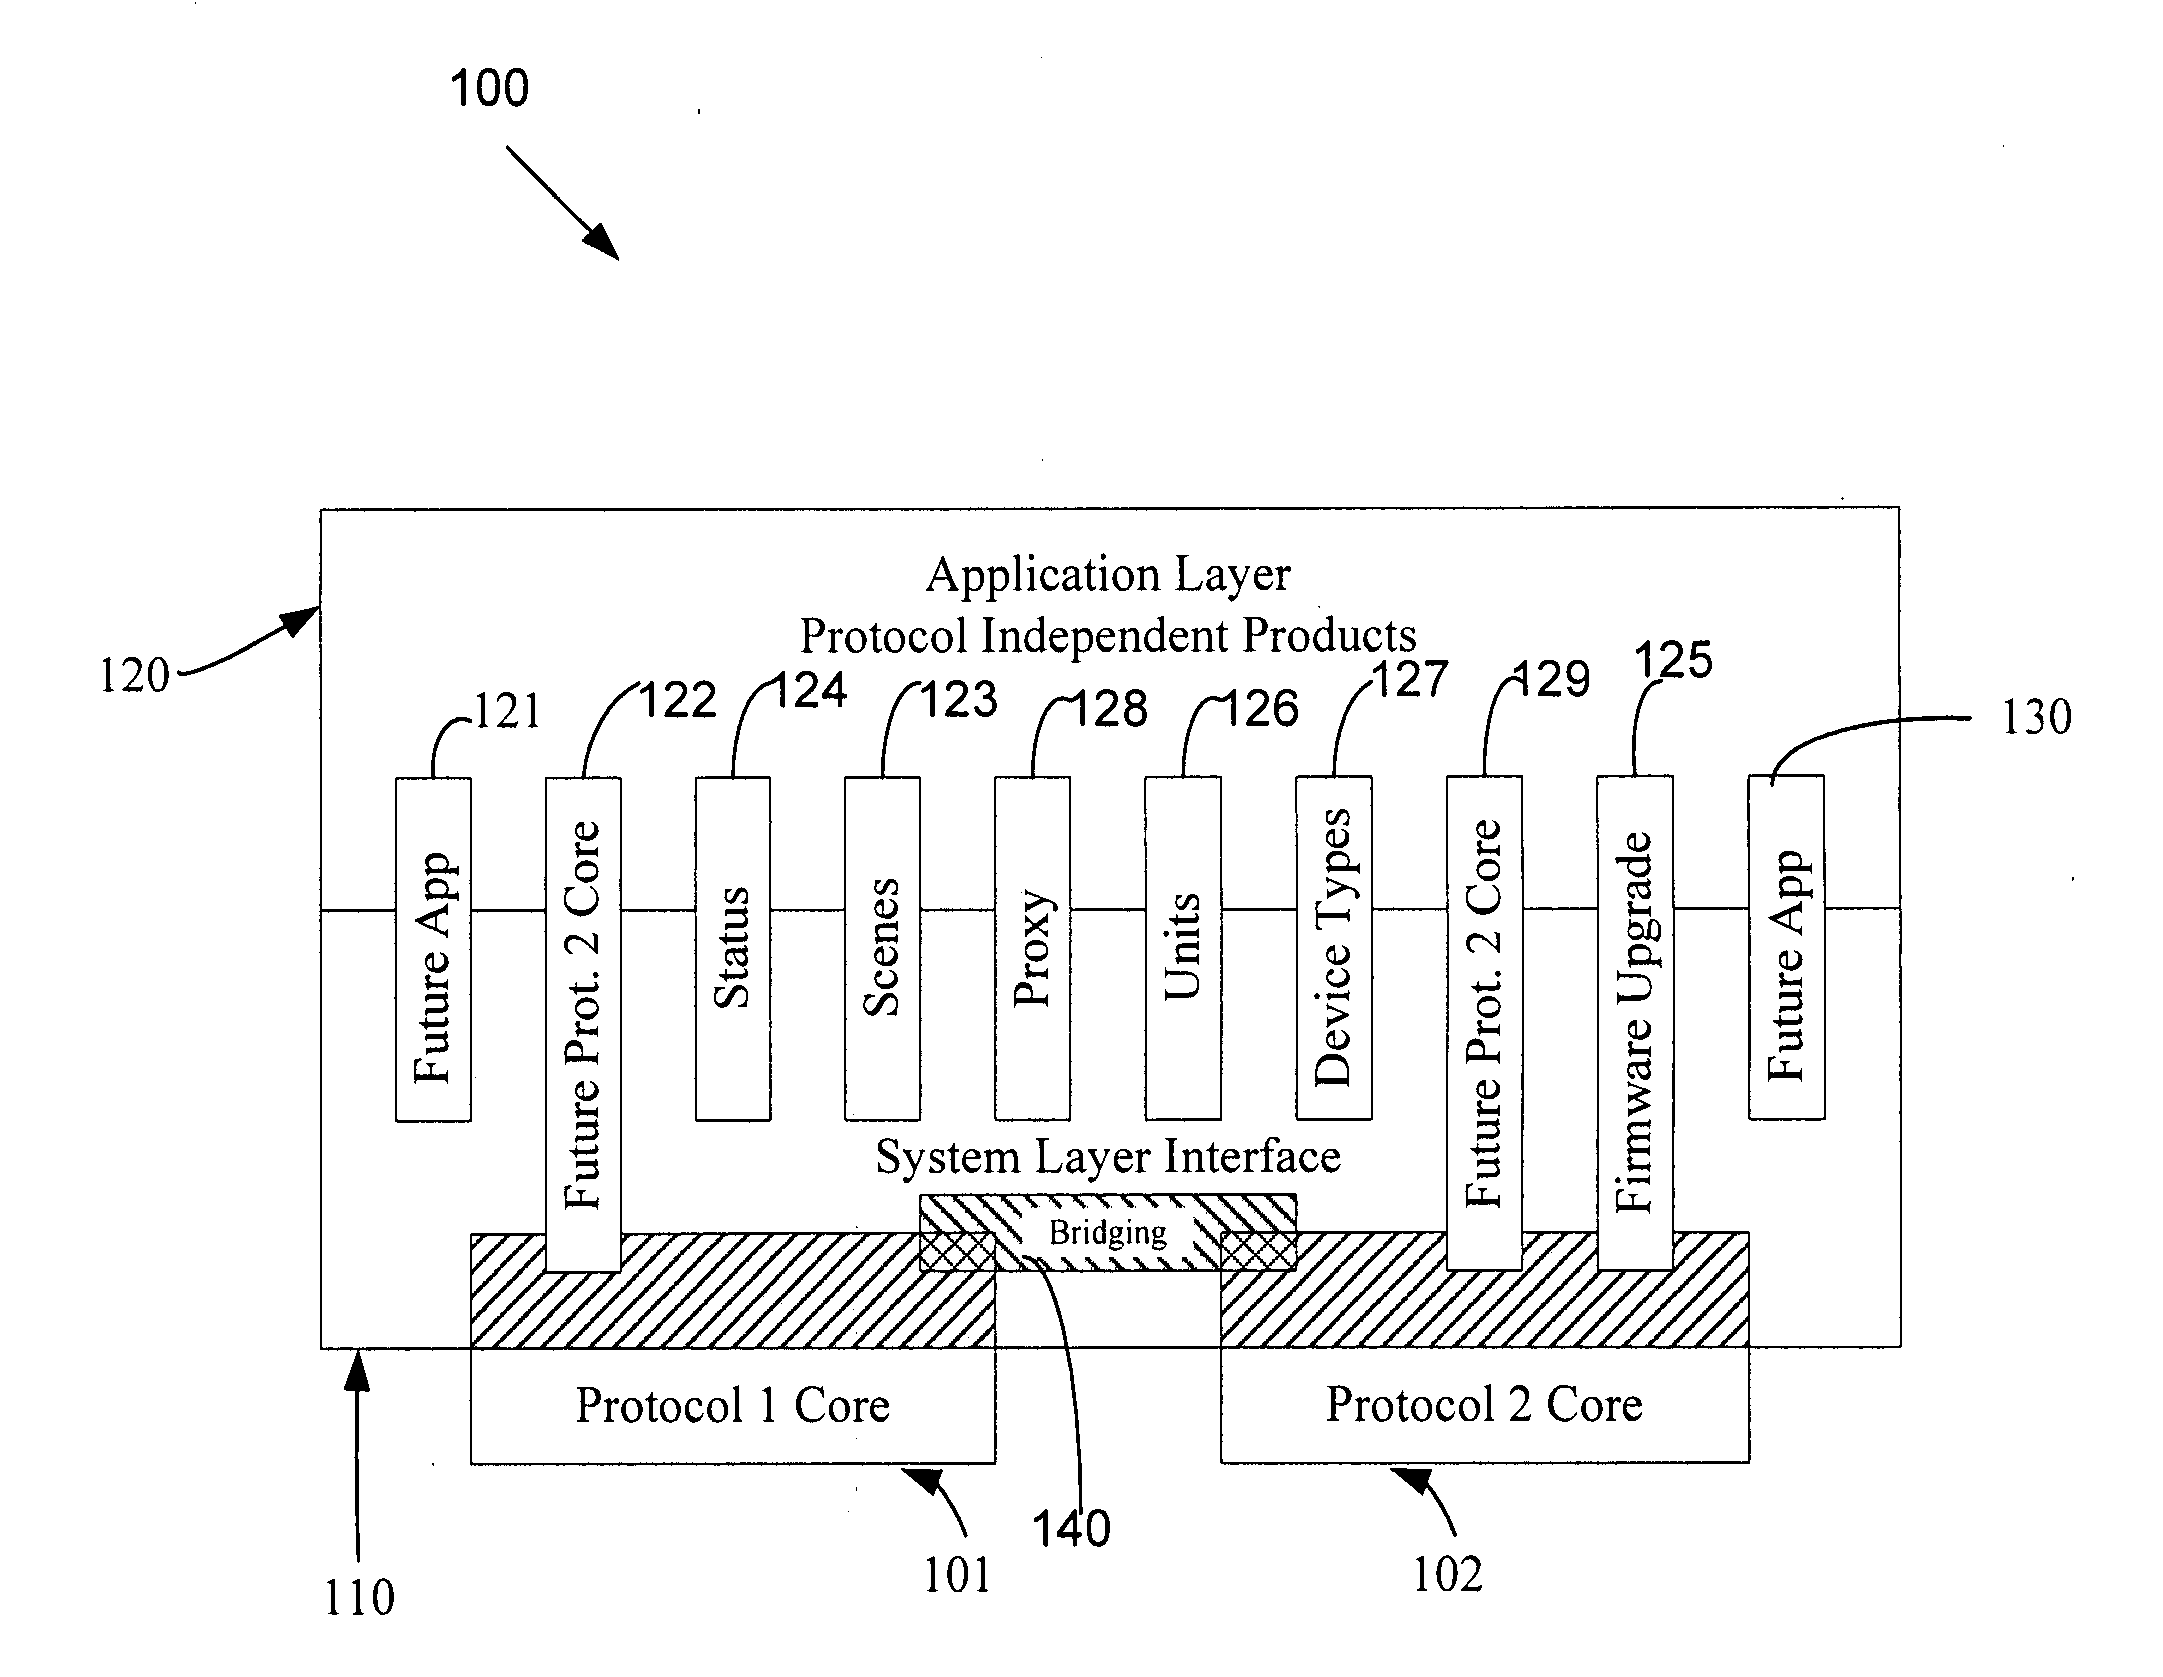 Device types and units for a home automation data transfer system